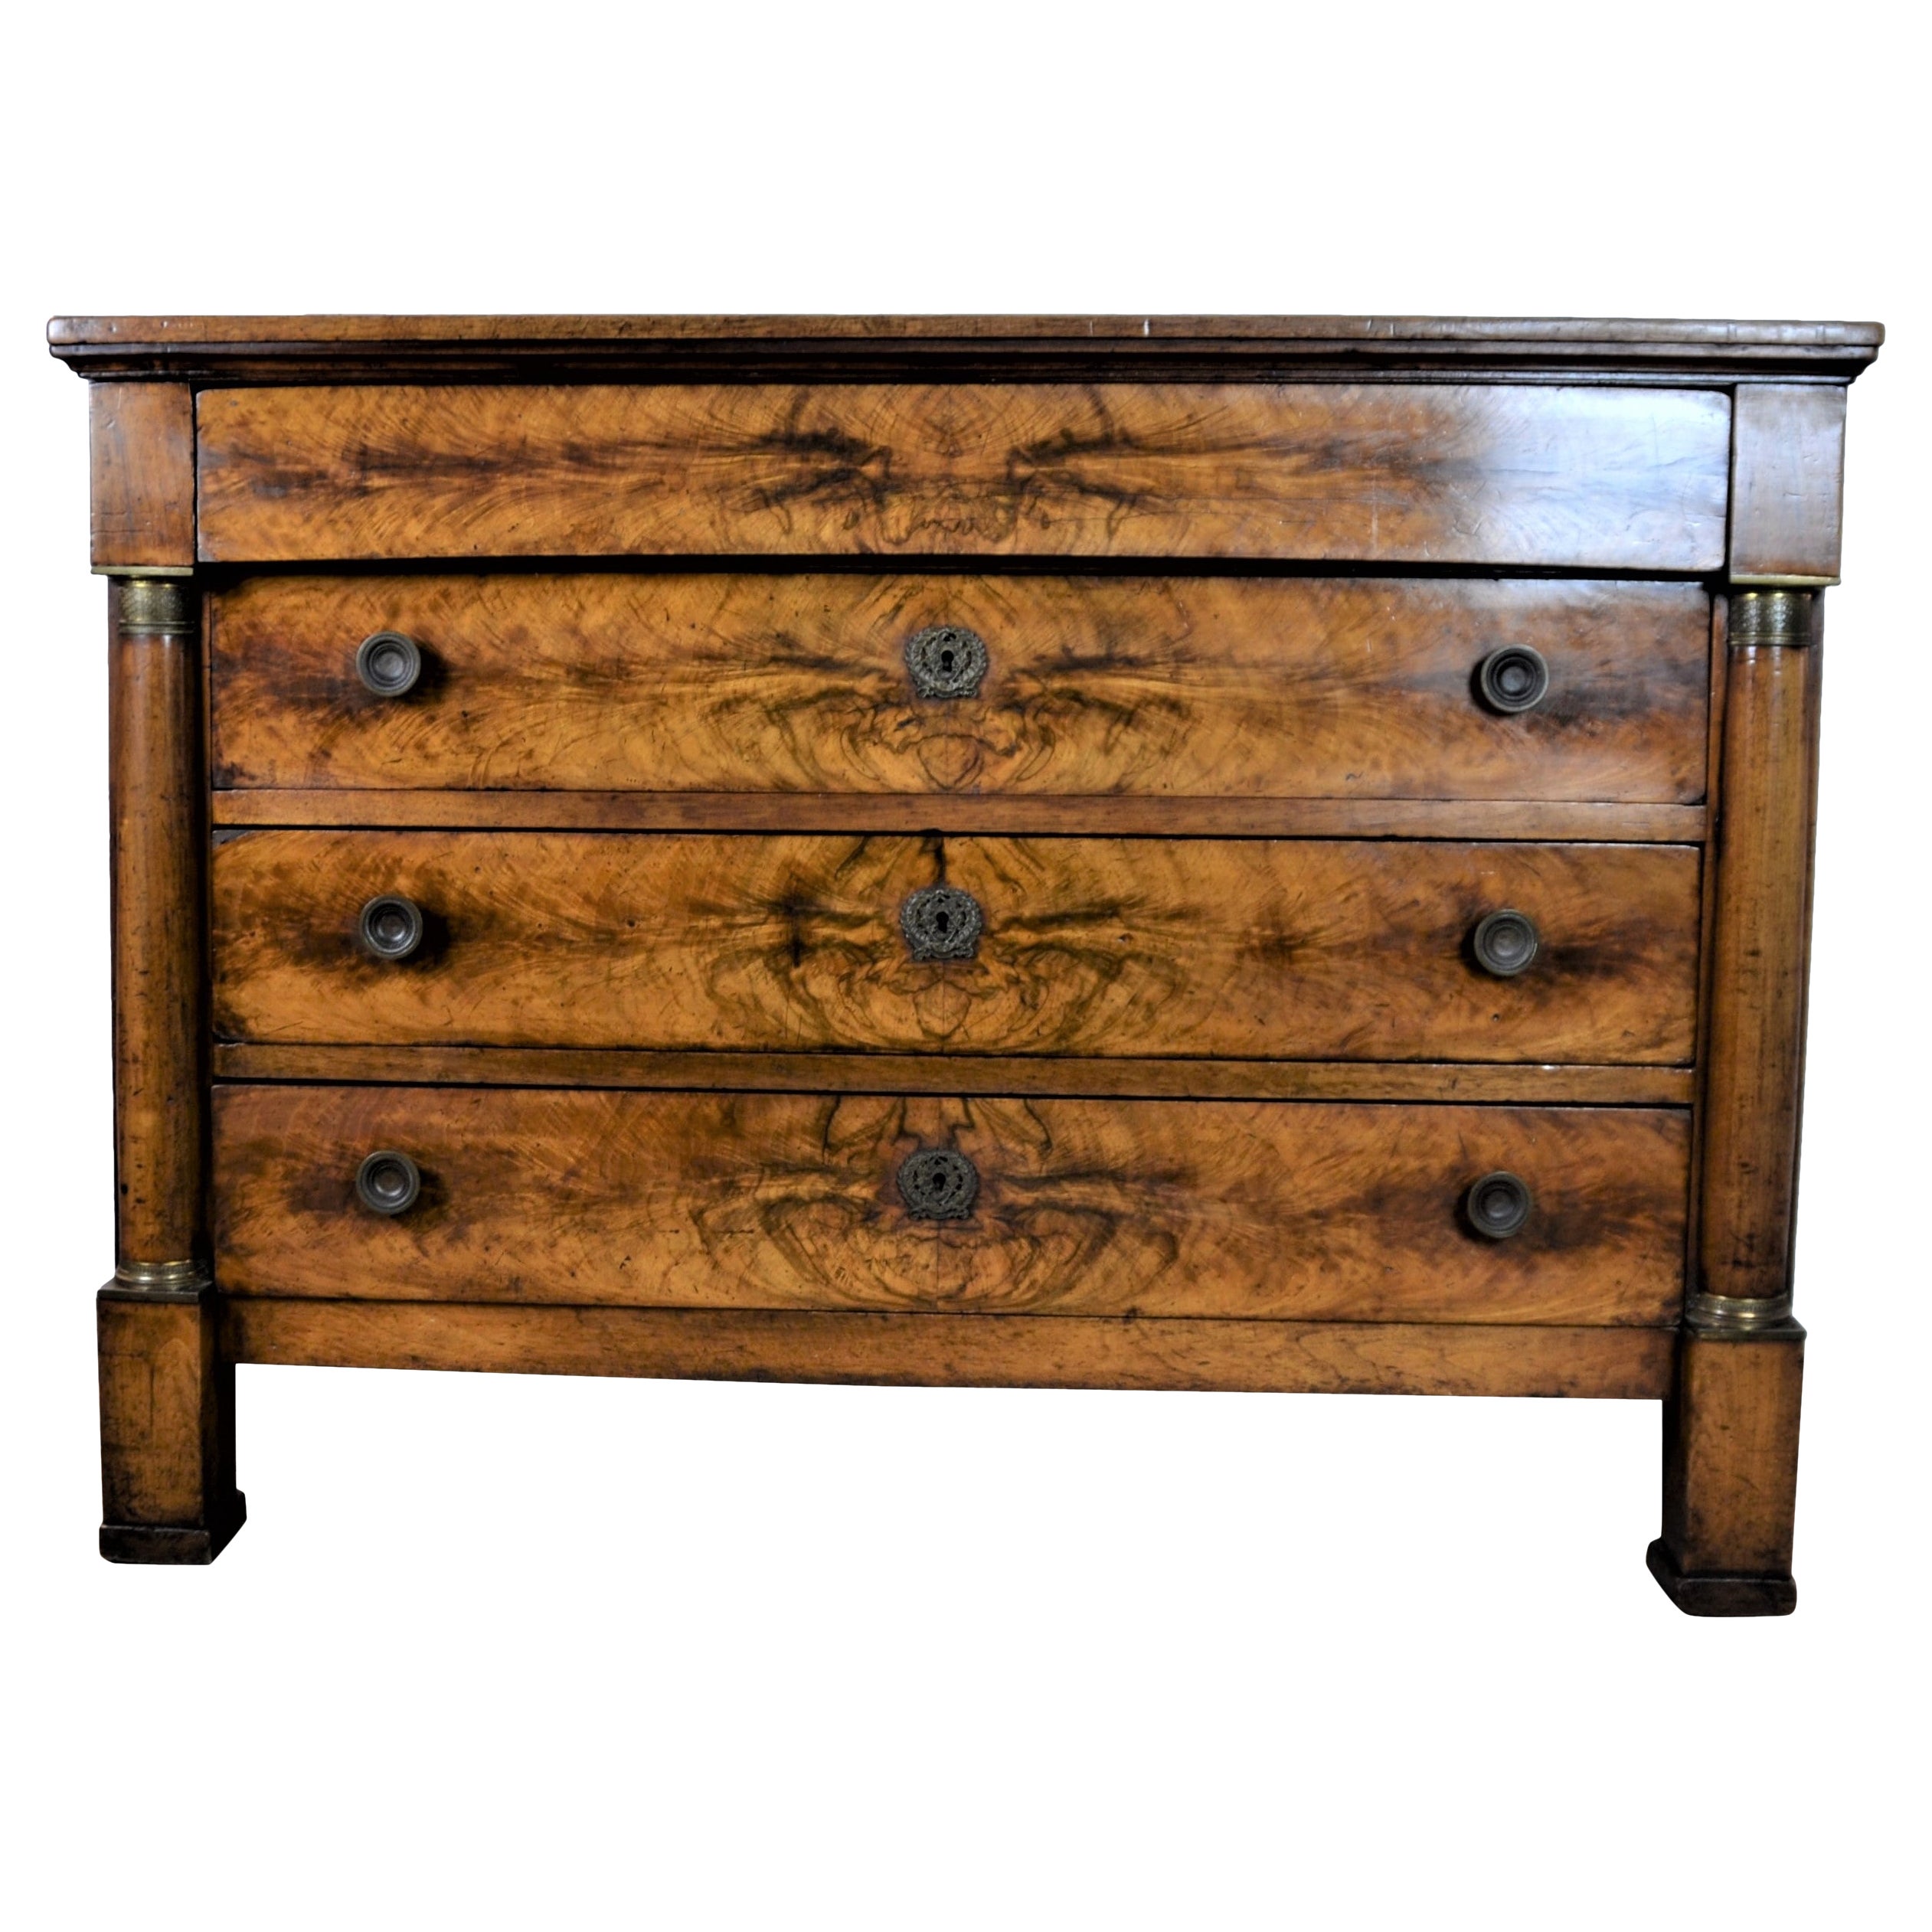 C.1830 French Empire Commode